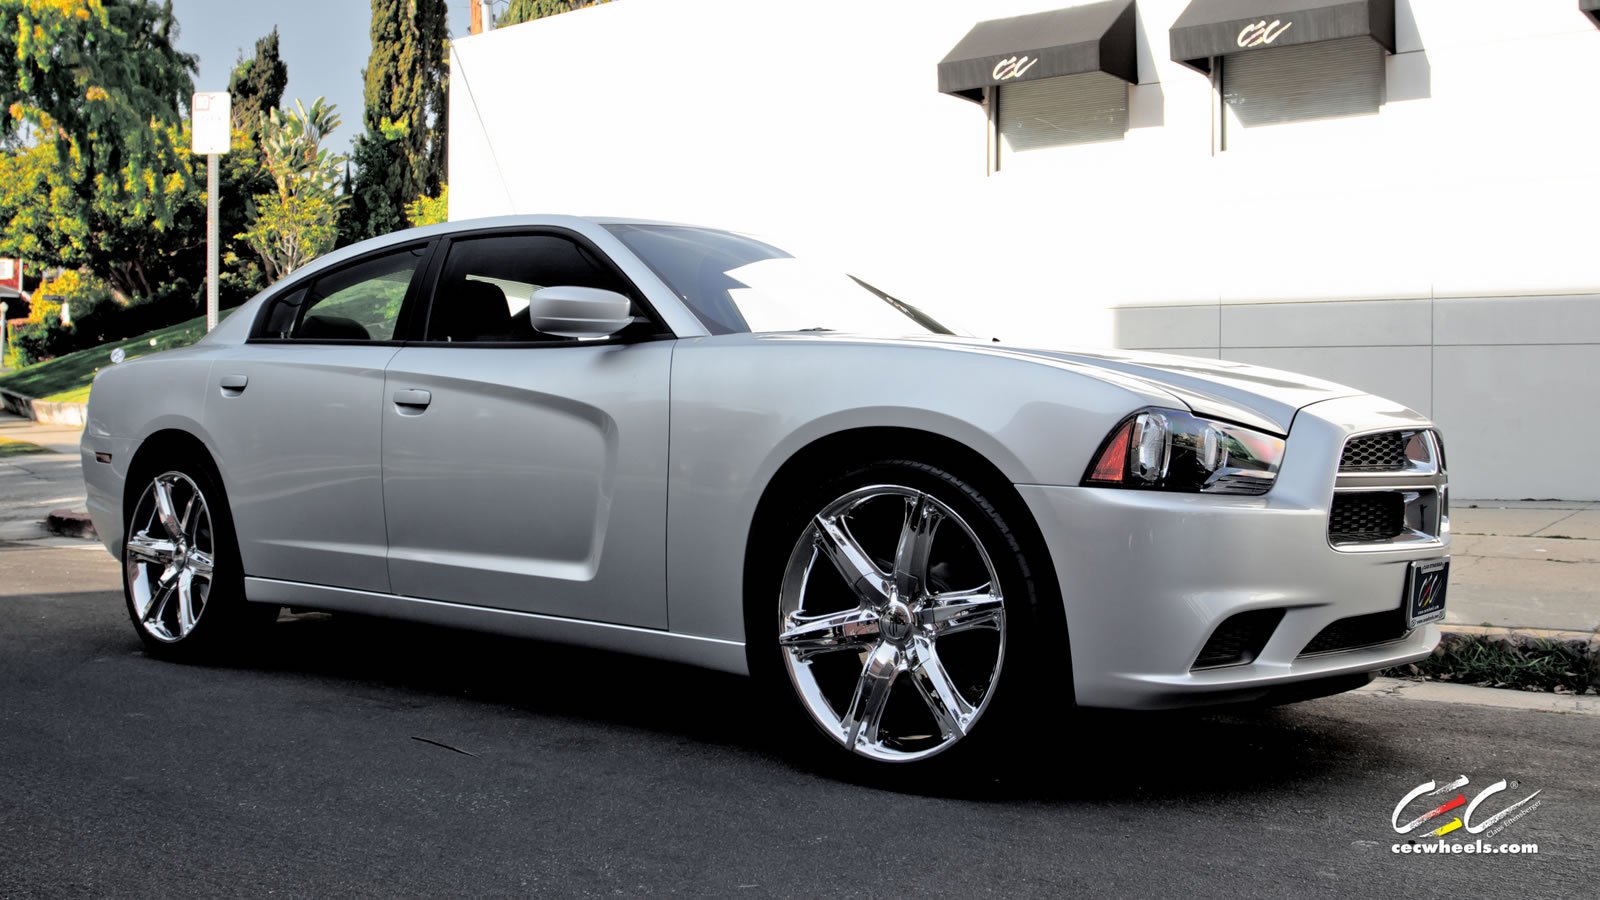 2015, Cars, Cec, Tuning, Wheels, Dodge, Charger Wallpaper